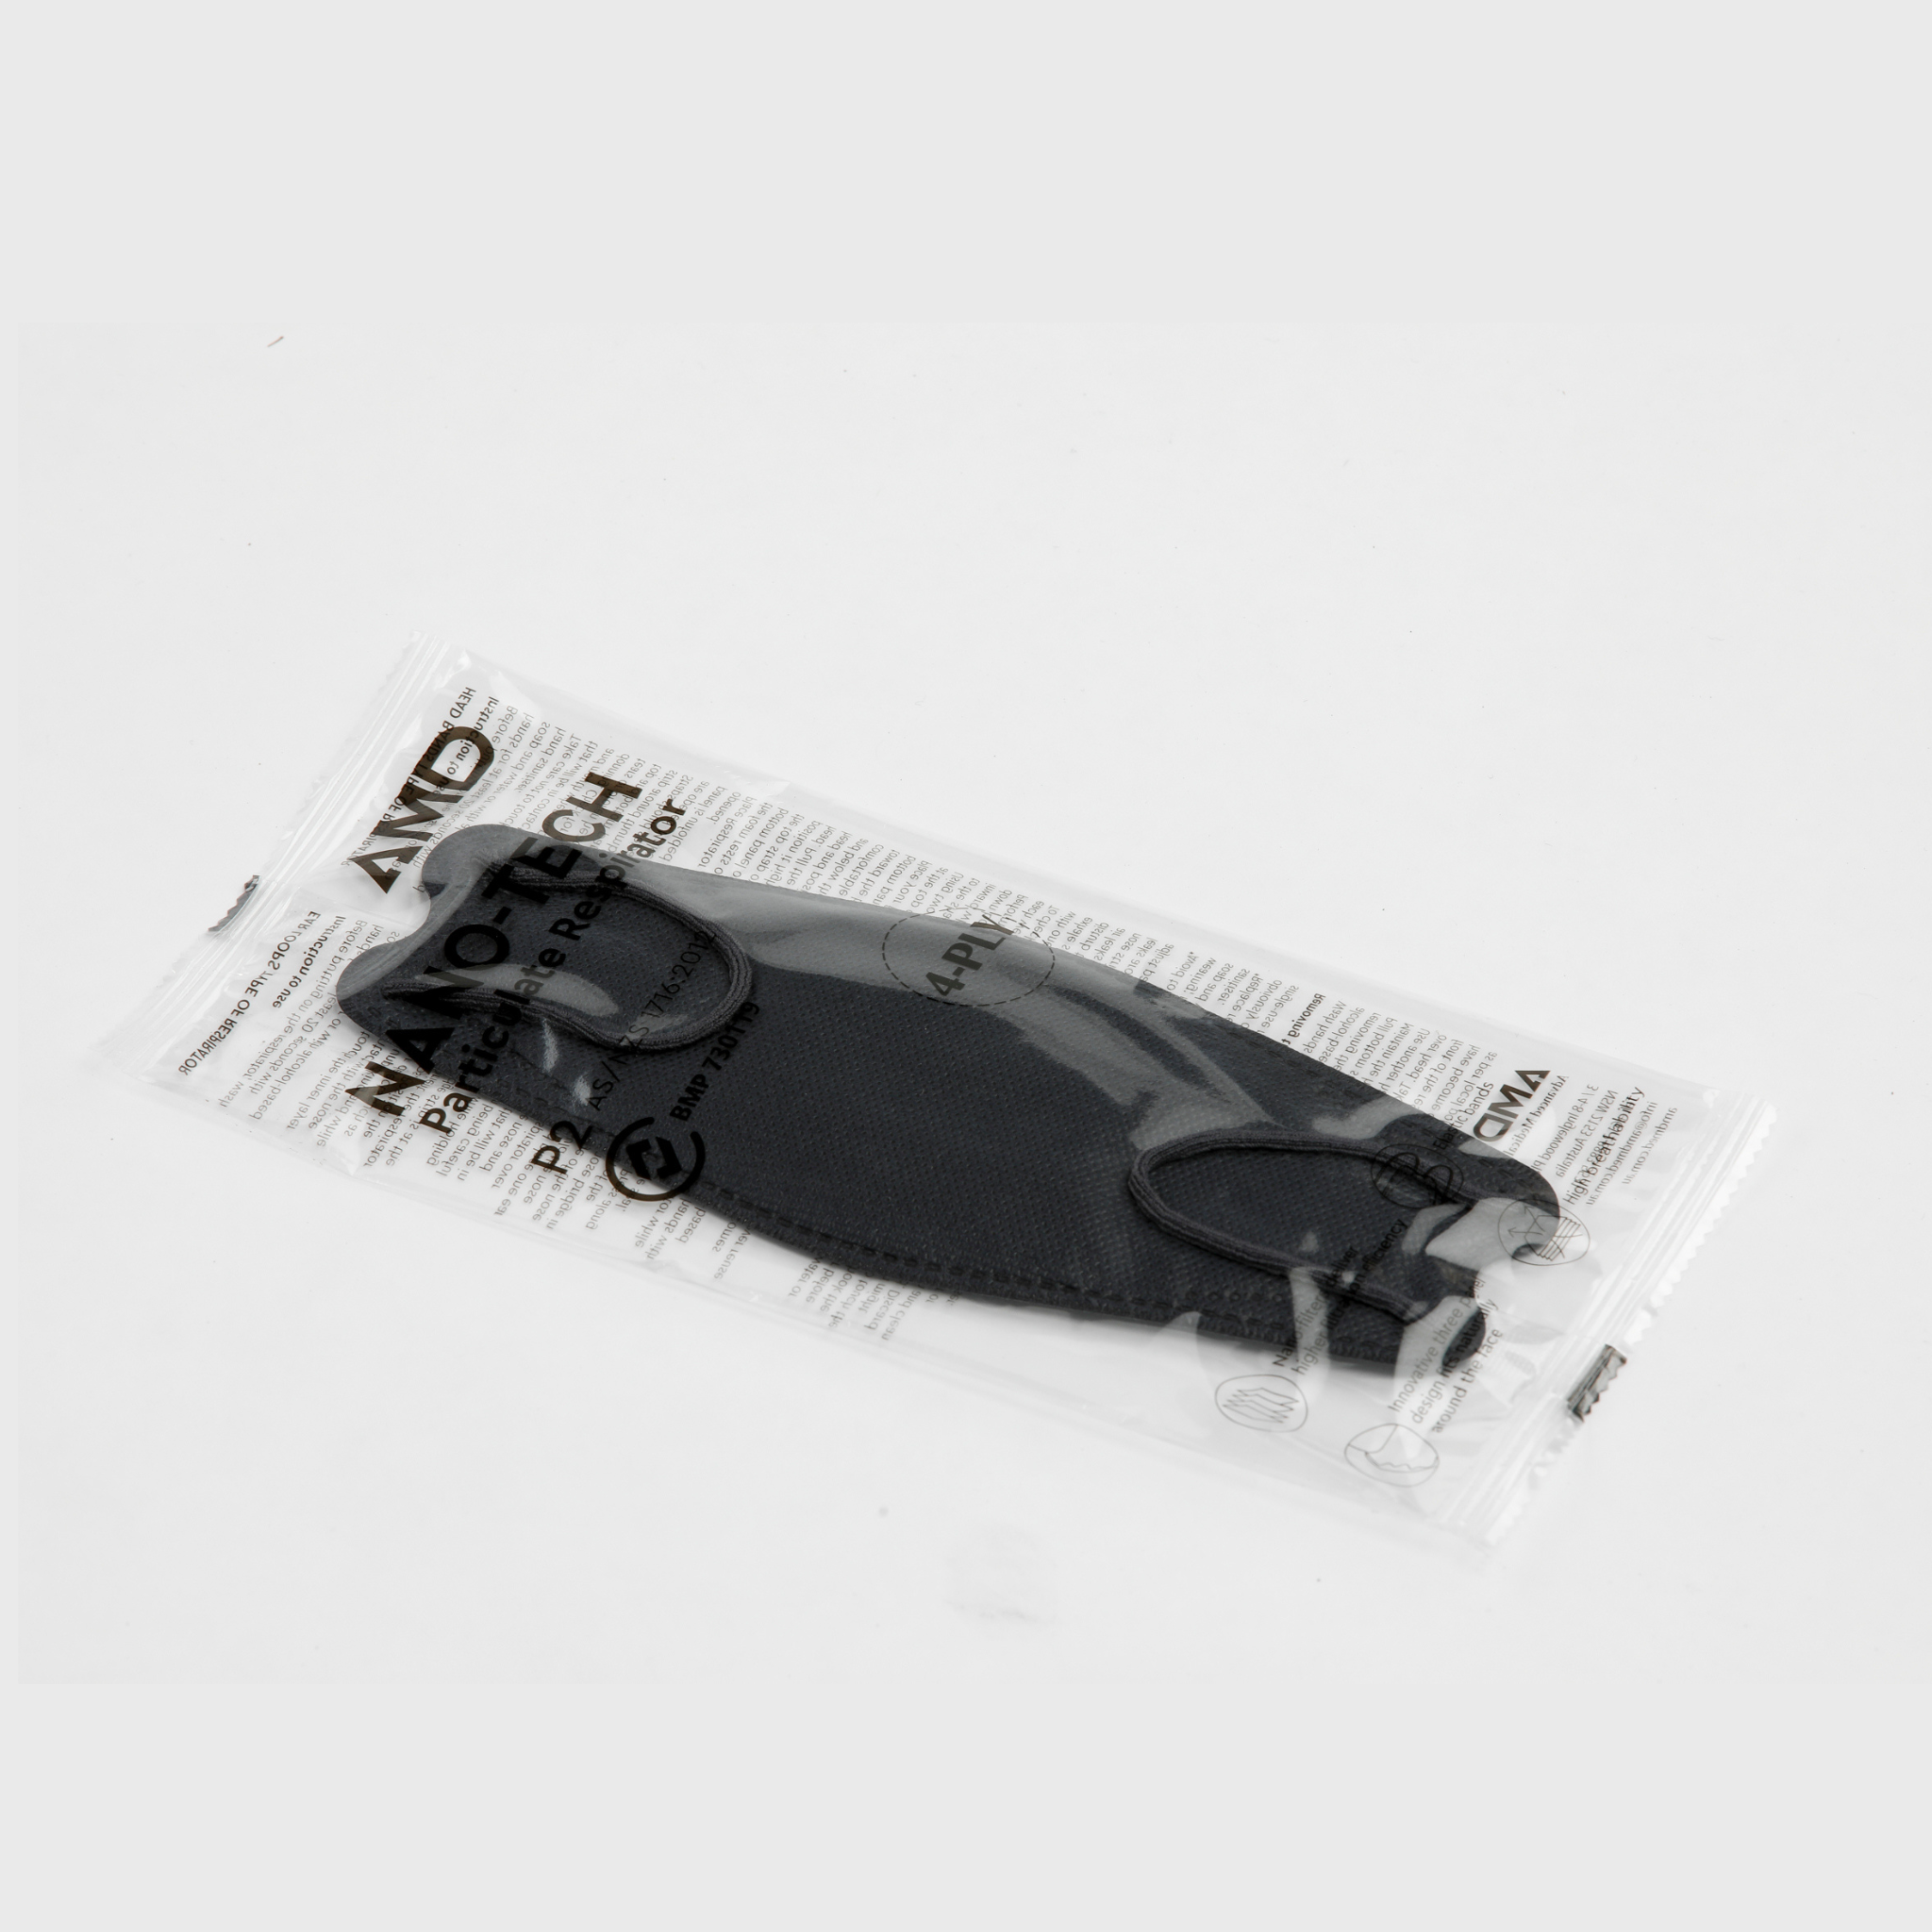 AMD P2/N95 individually wrapped face mask 